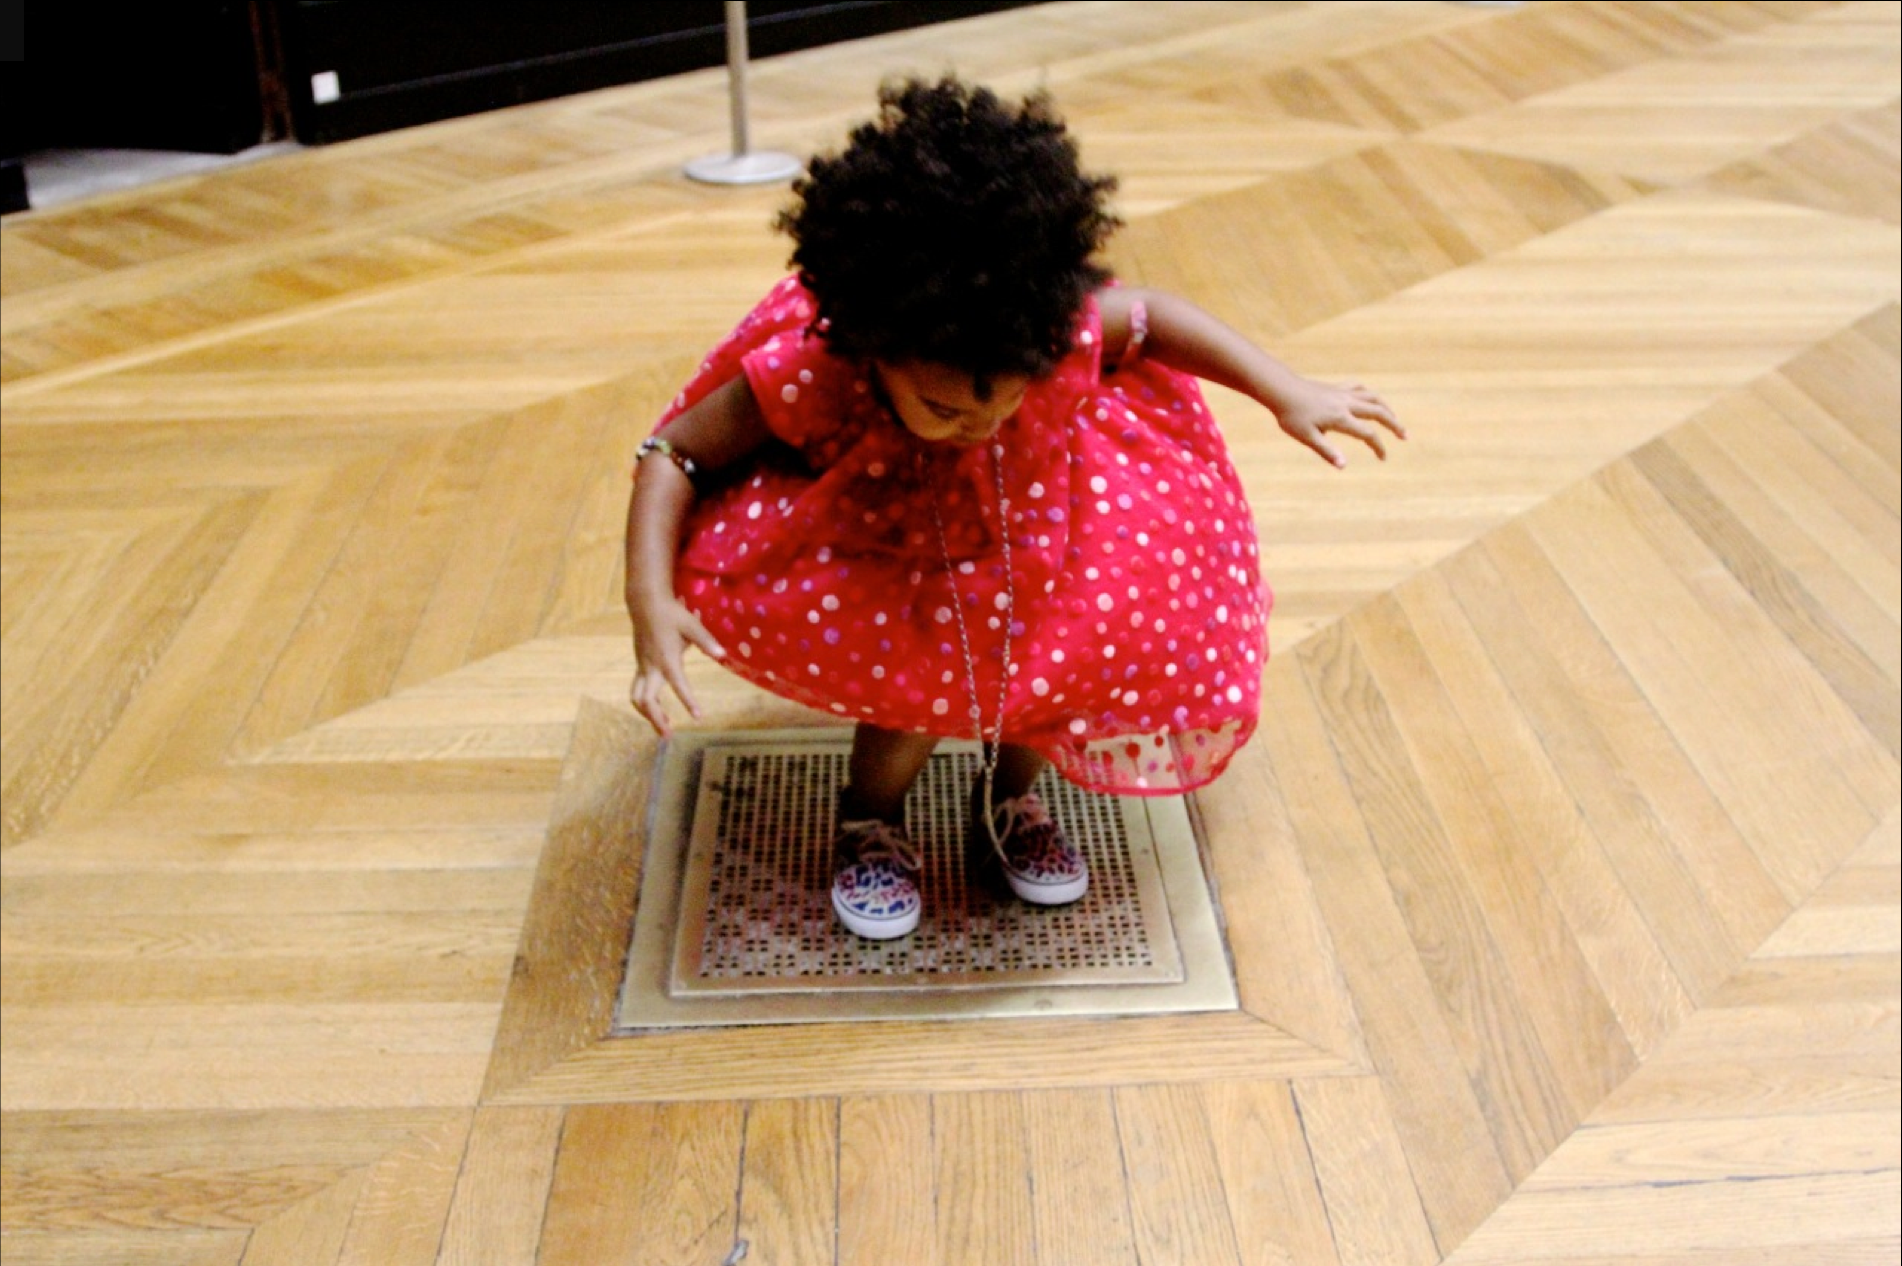 Blue Ivy's Most Adorable Mini Style Moments
